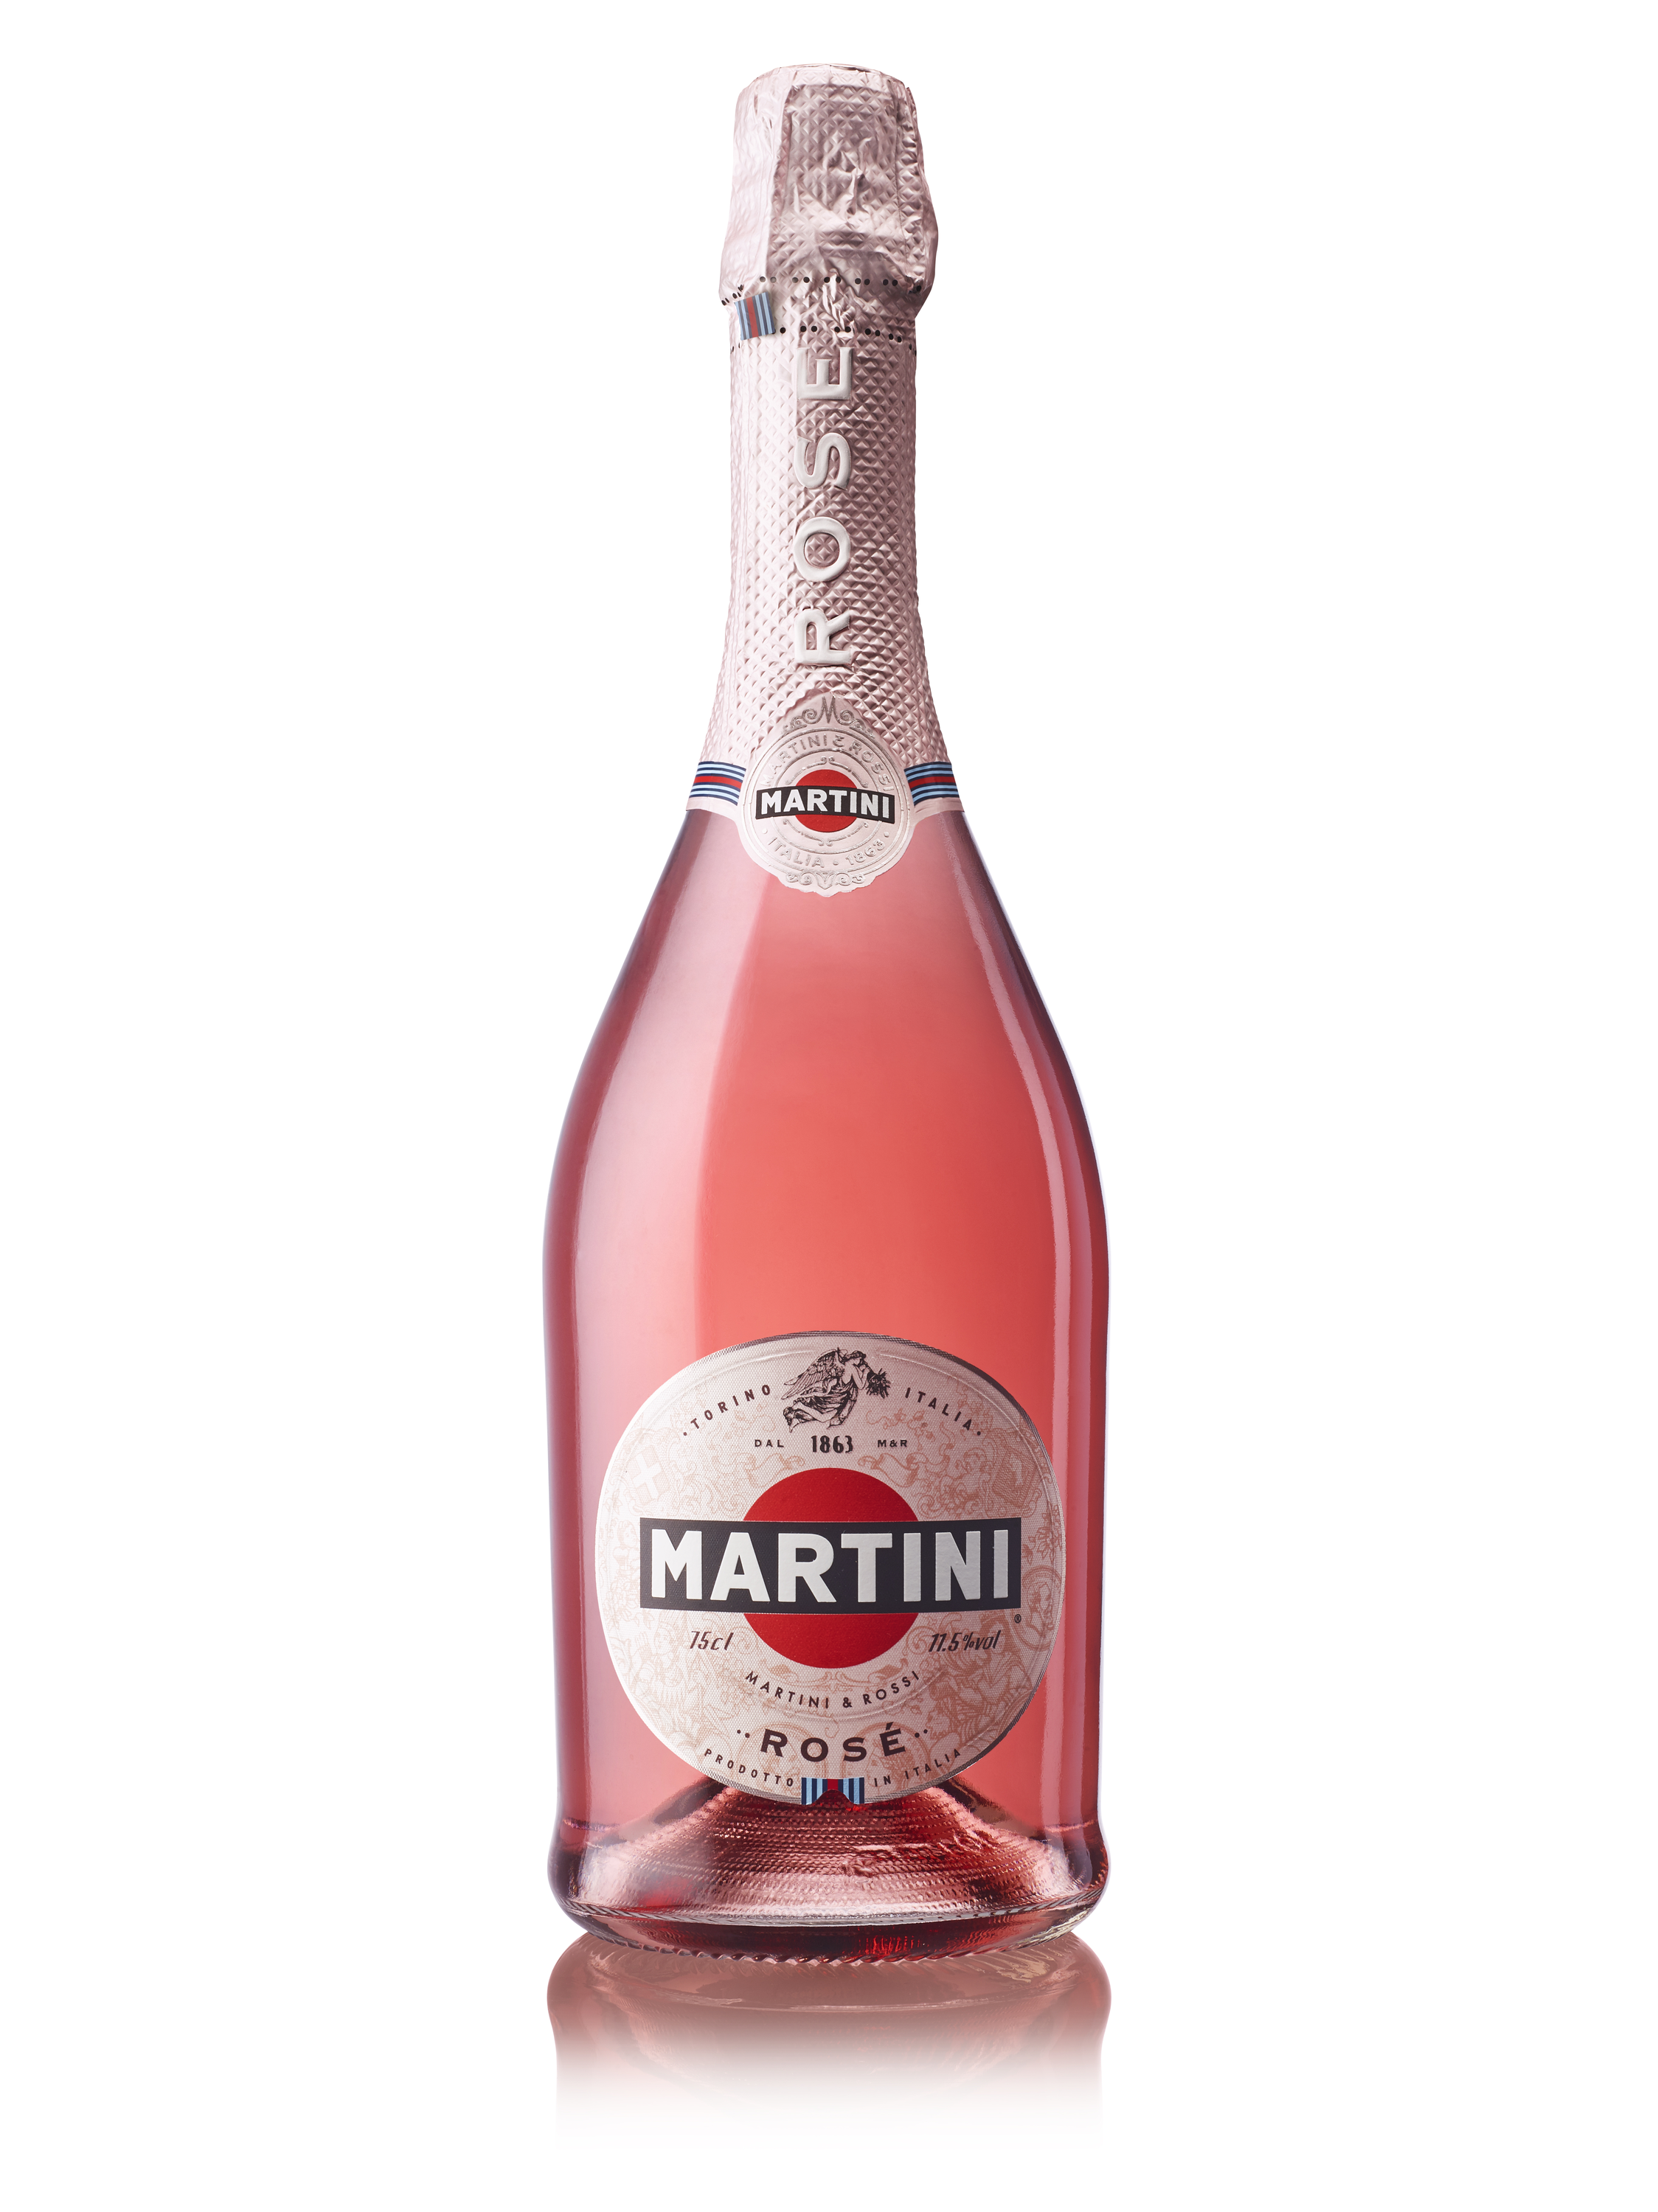 Buy martini rose online in barrels.ng and get it delivered to you.